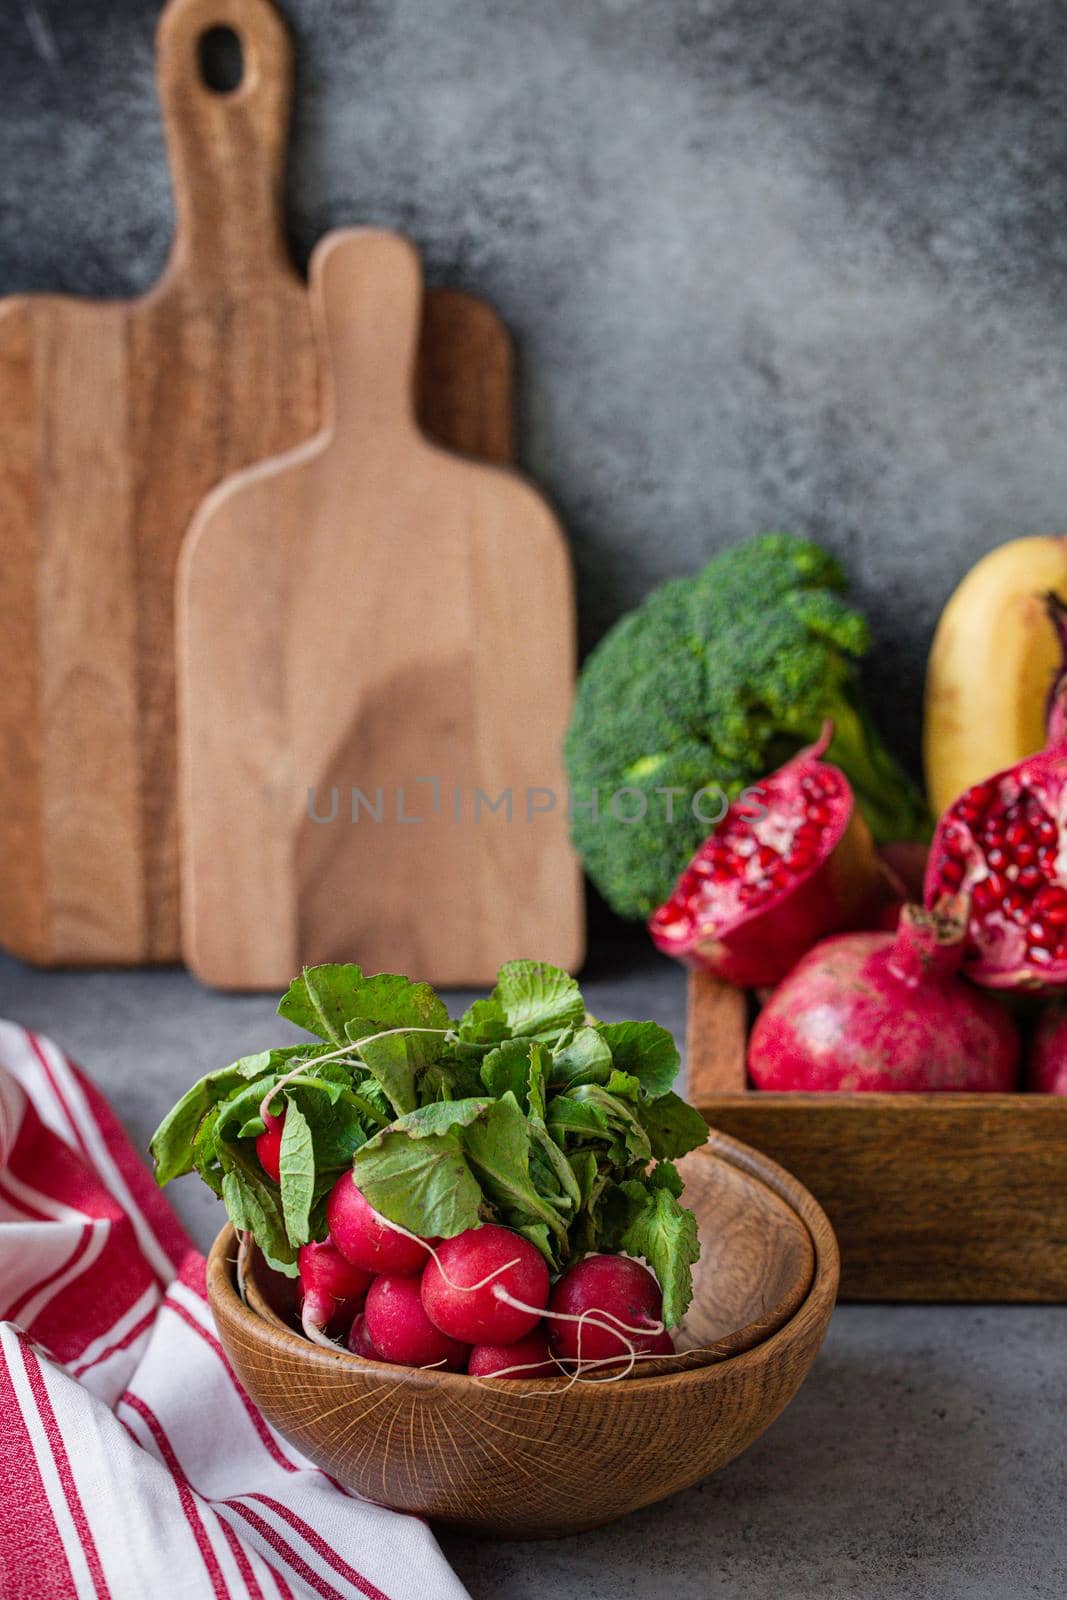 Bunch of fresh raw radish in wooden bowl on kitchen table with fresh fruit, greens, vegetables in wooden tray on grey stone background table, cooking healthy diet vegetarian food meal concept.